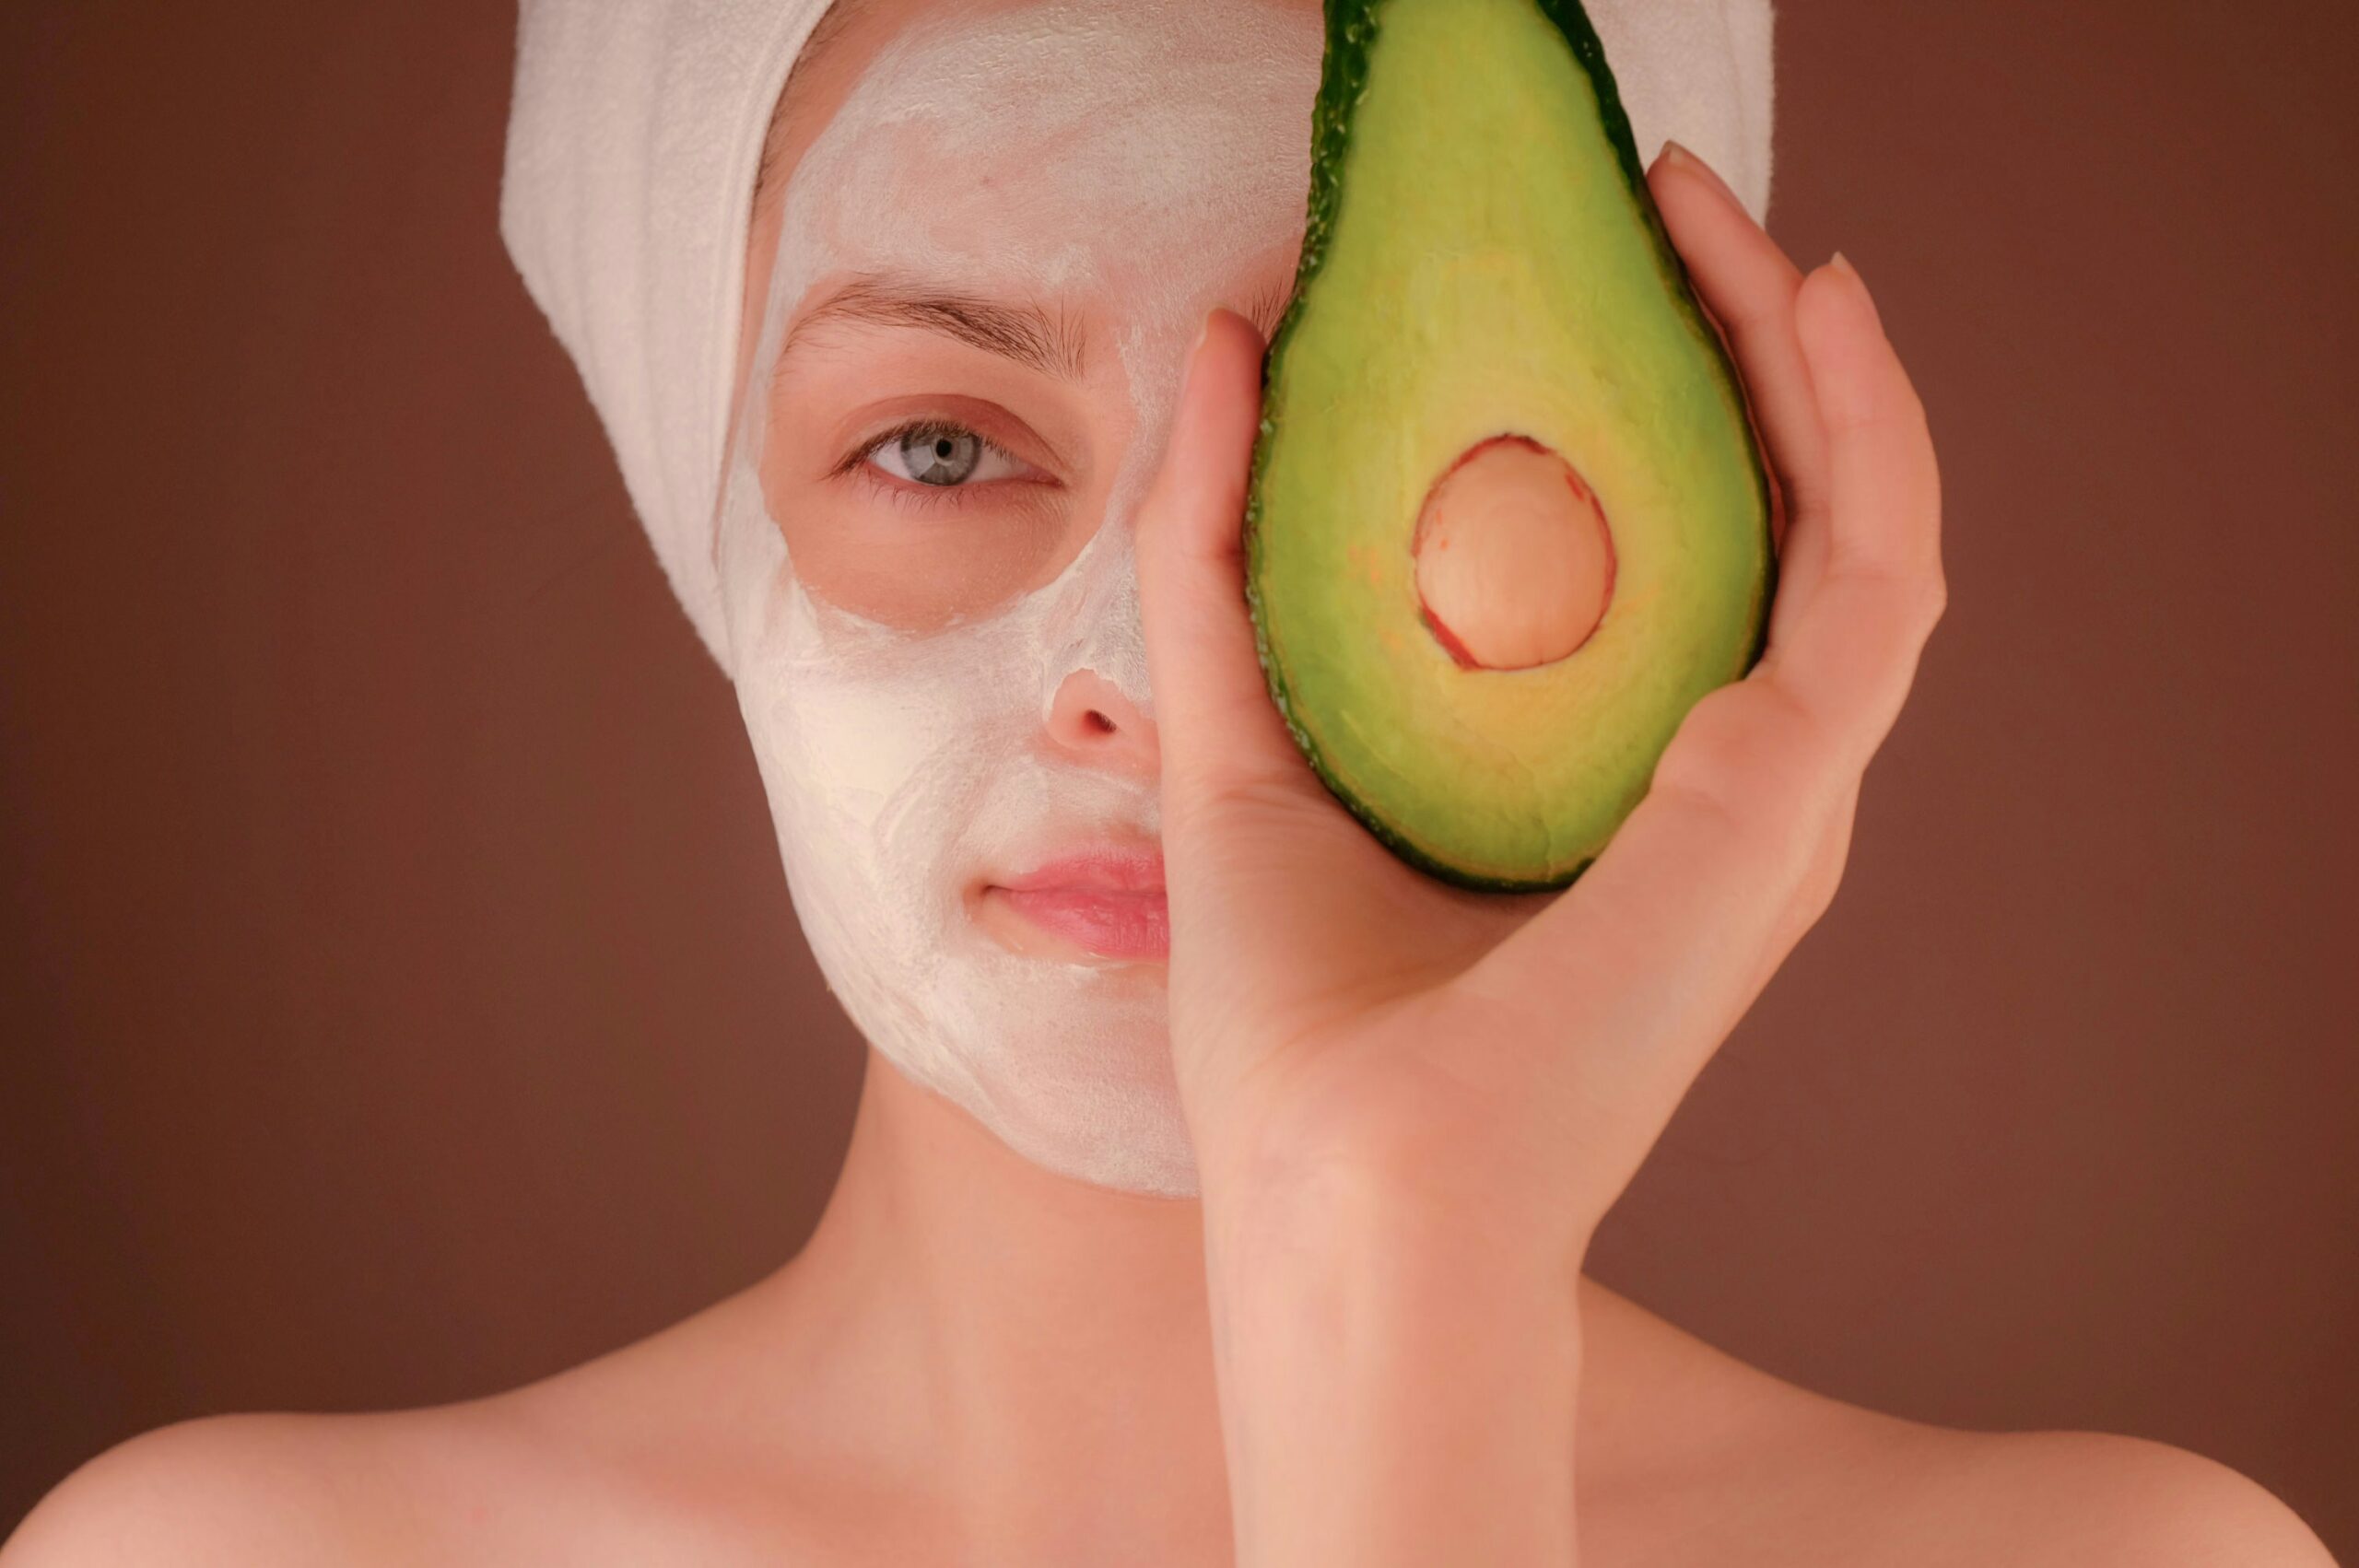 The Importance of Reading Labels on Skin Care and Personal Care Products